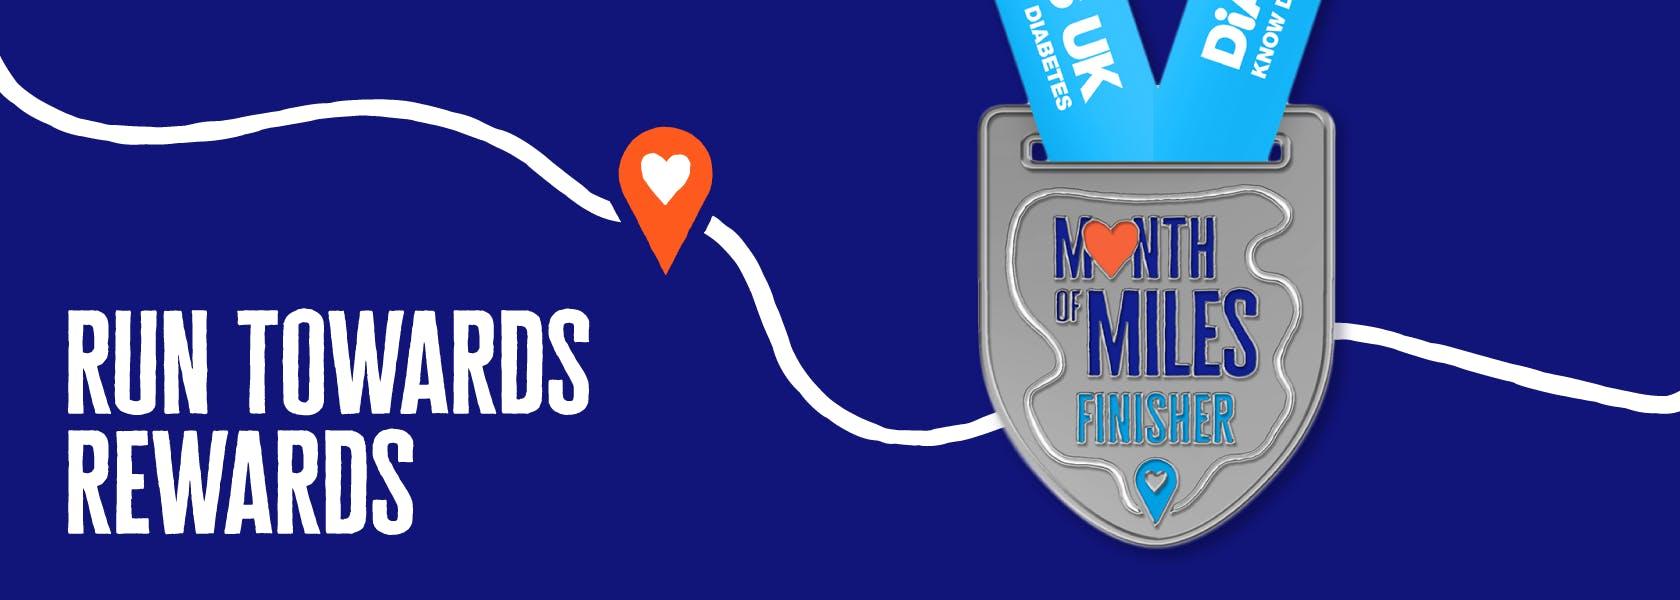 Collect your Month of Miles finisher medal as you complete your Diabetes UK running challenge 